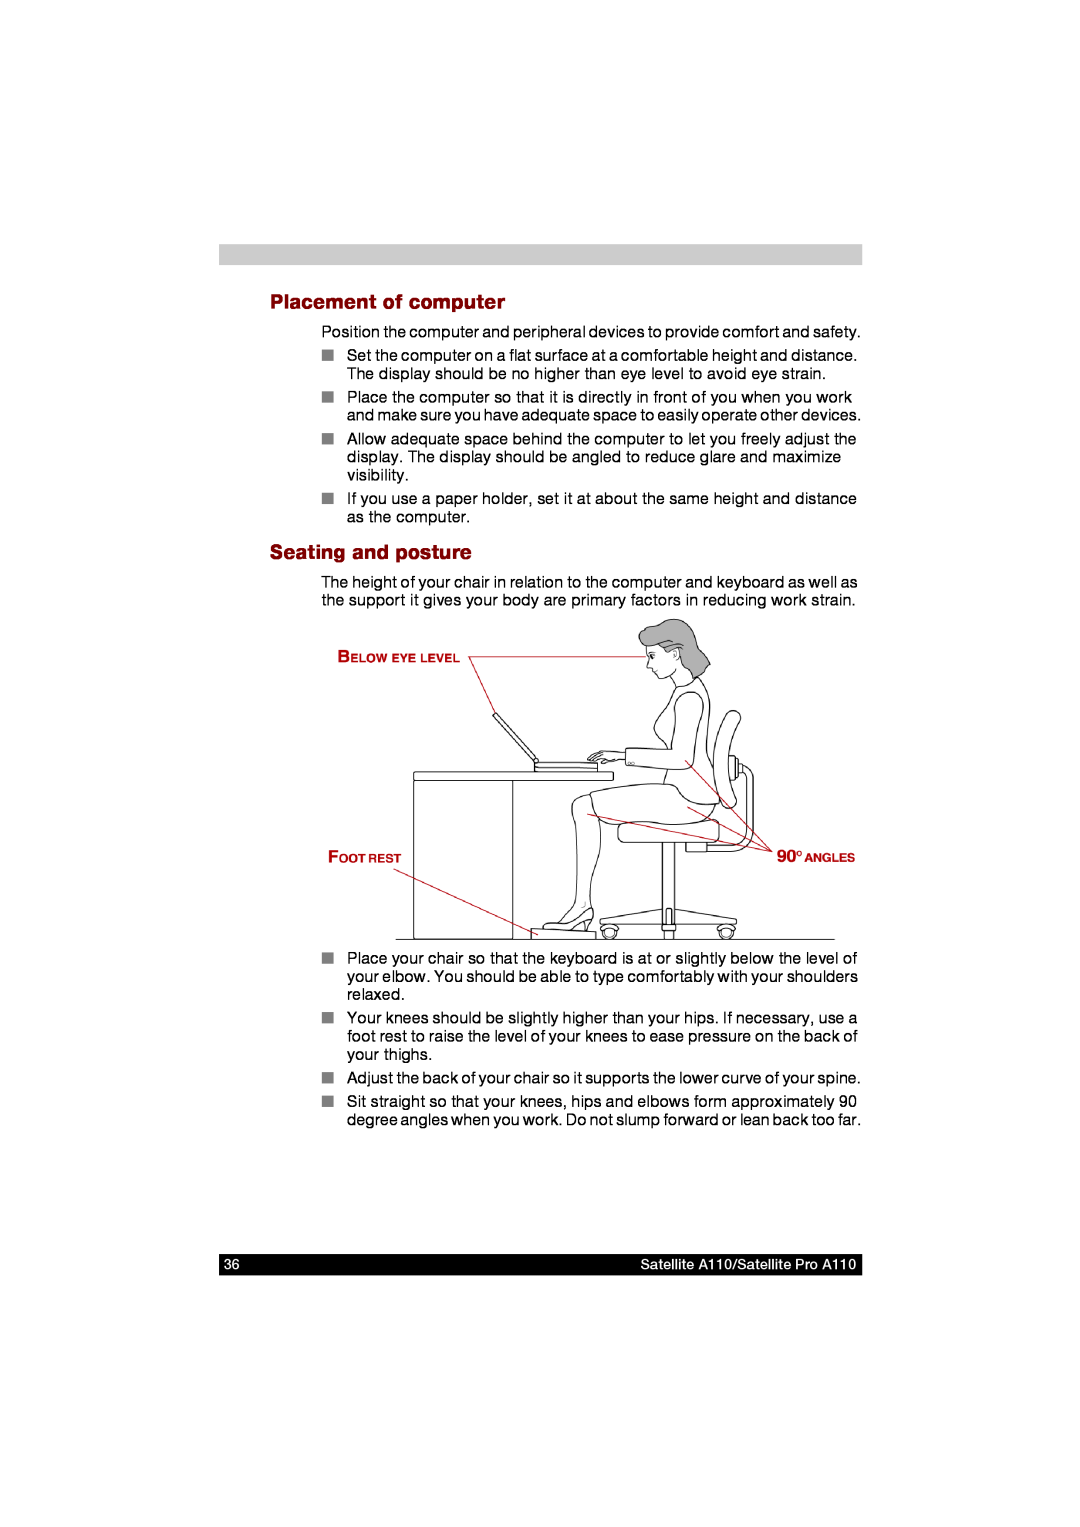 Toshiba A110 user manual Placement of computer, Seating and posture 